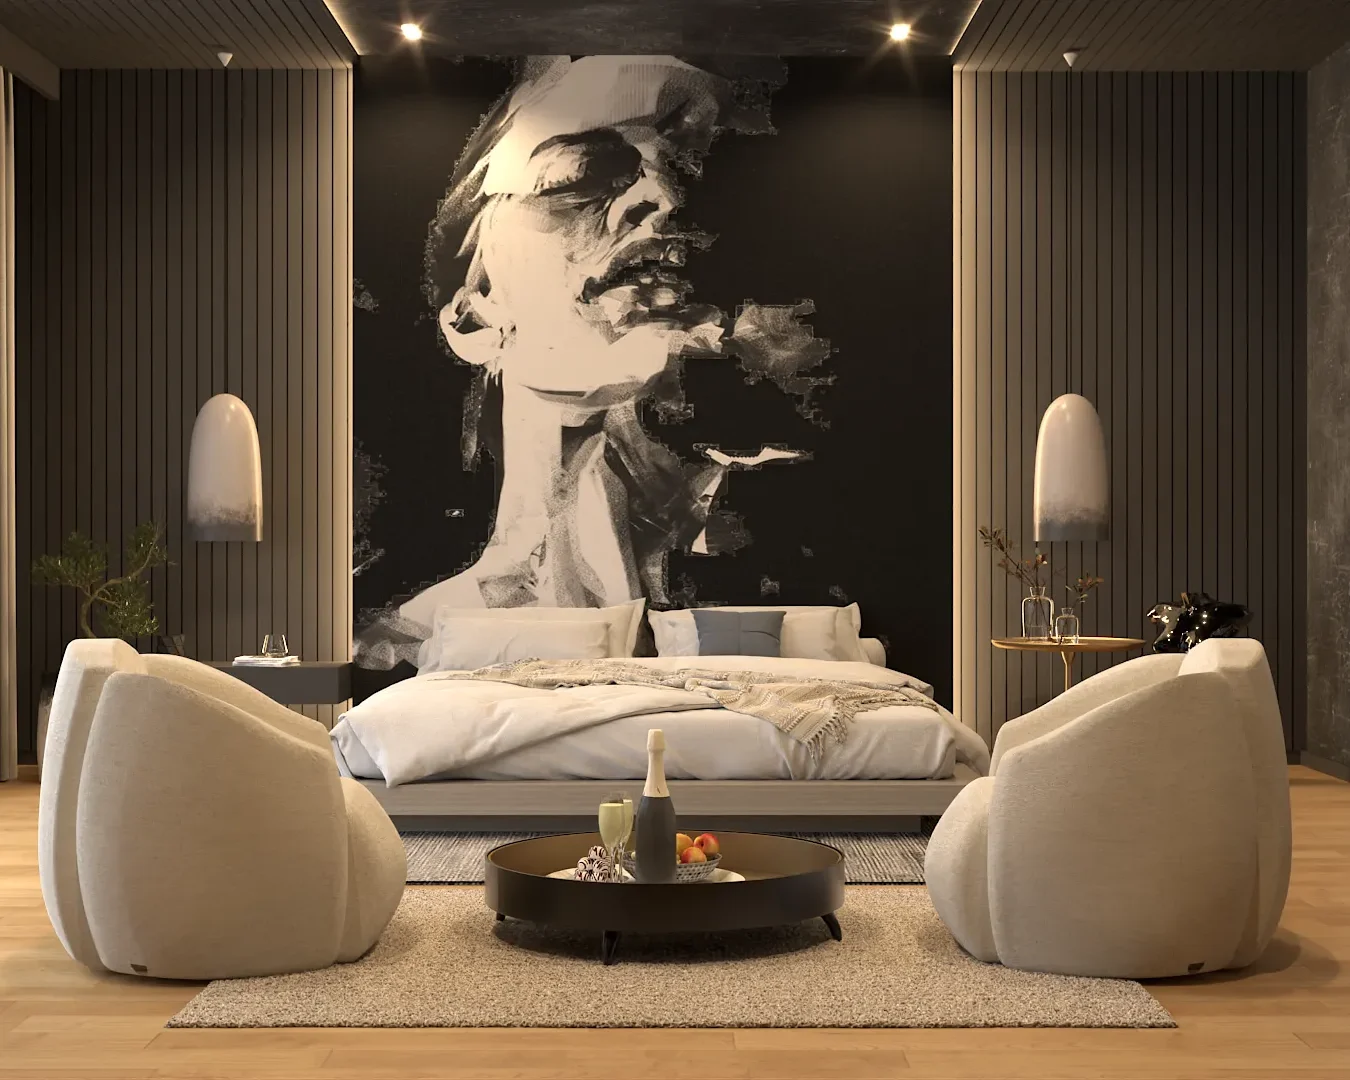 Bold and artistic bedroom featuring a large black and white portrait on the statement wall, modern dark paneling, and stylish furnishings including unique beanbag chairs, creating a dynamic and visually striking space. Design by Debora, an online interior design service.